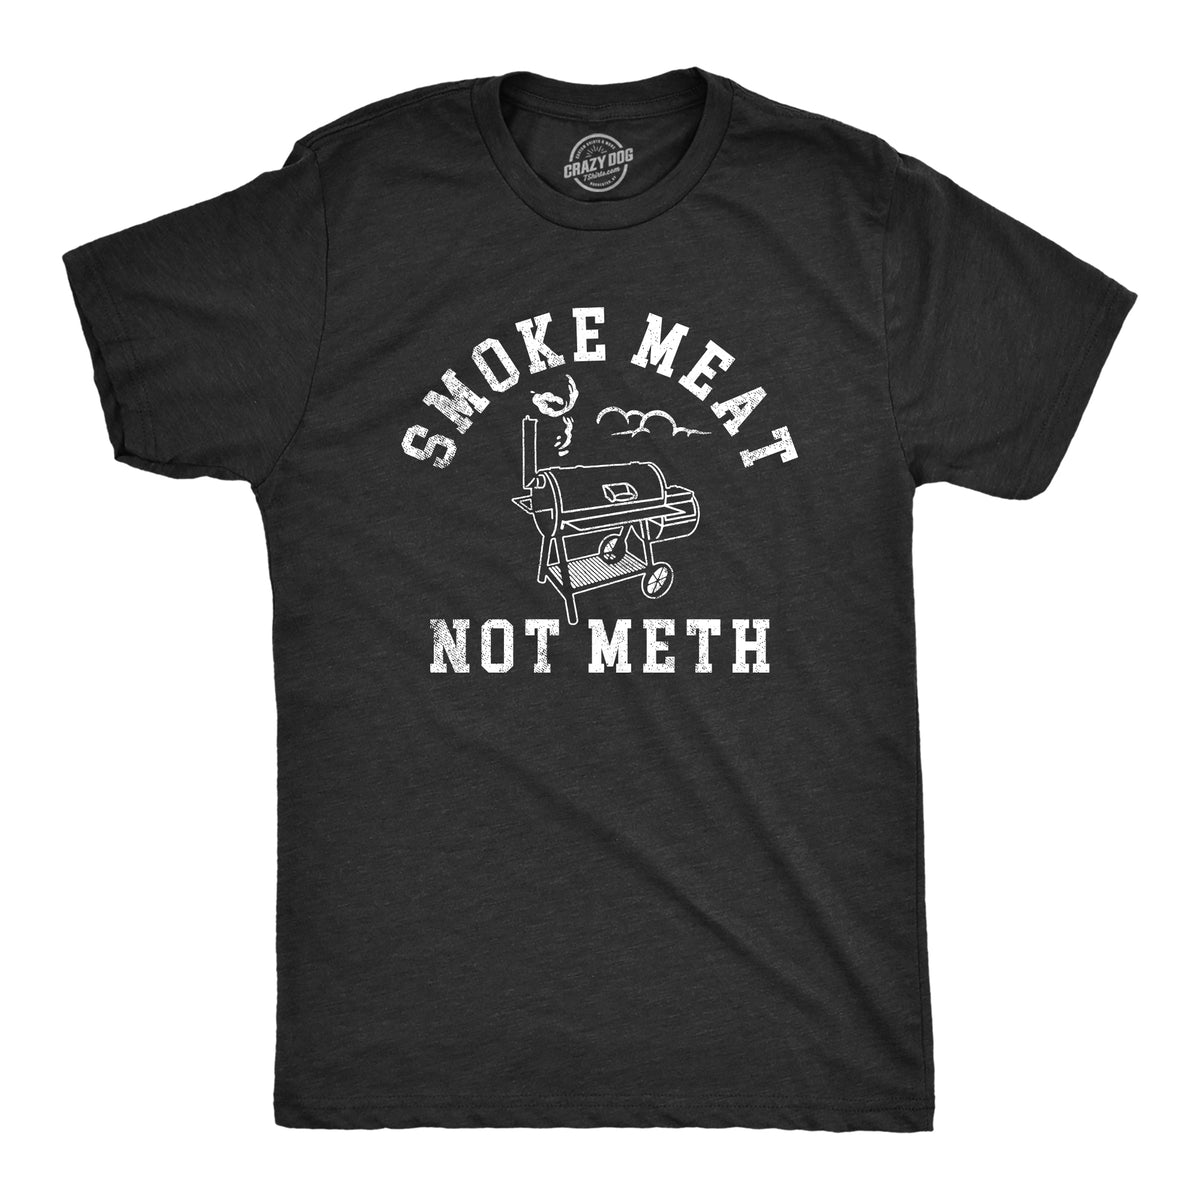 Funny Heather Black - MEAT Smoke Meat Not Meth Mens T Shirt Nerdy Food Sarcastic Tee